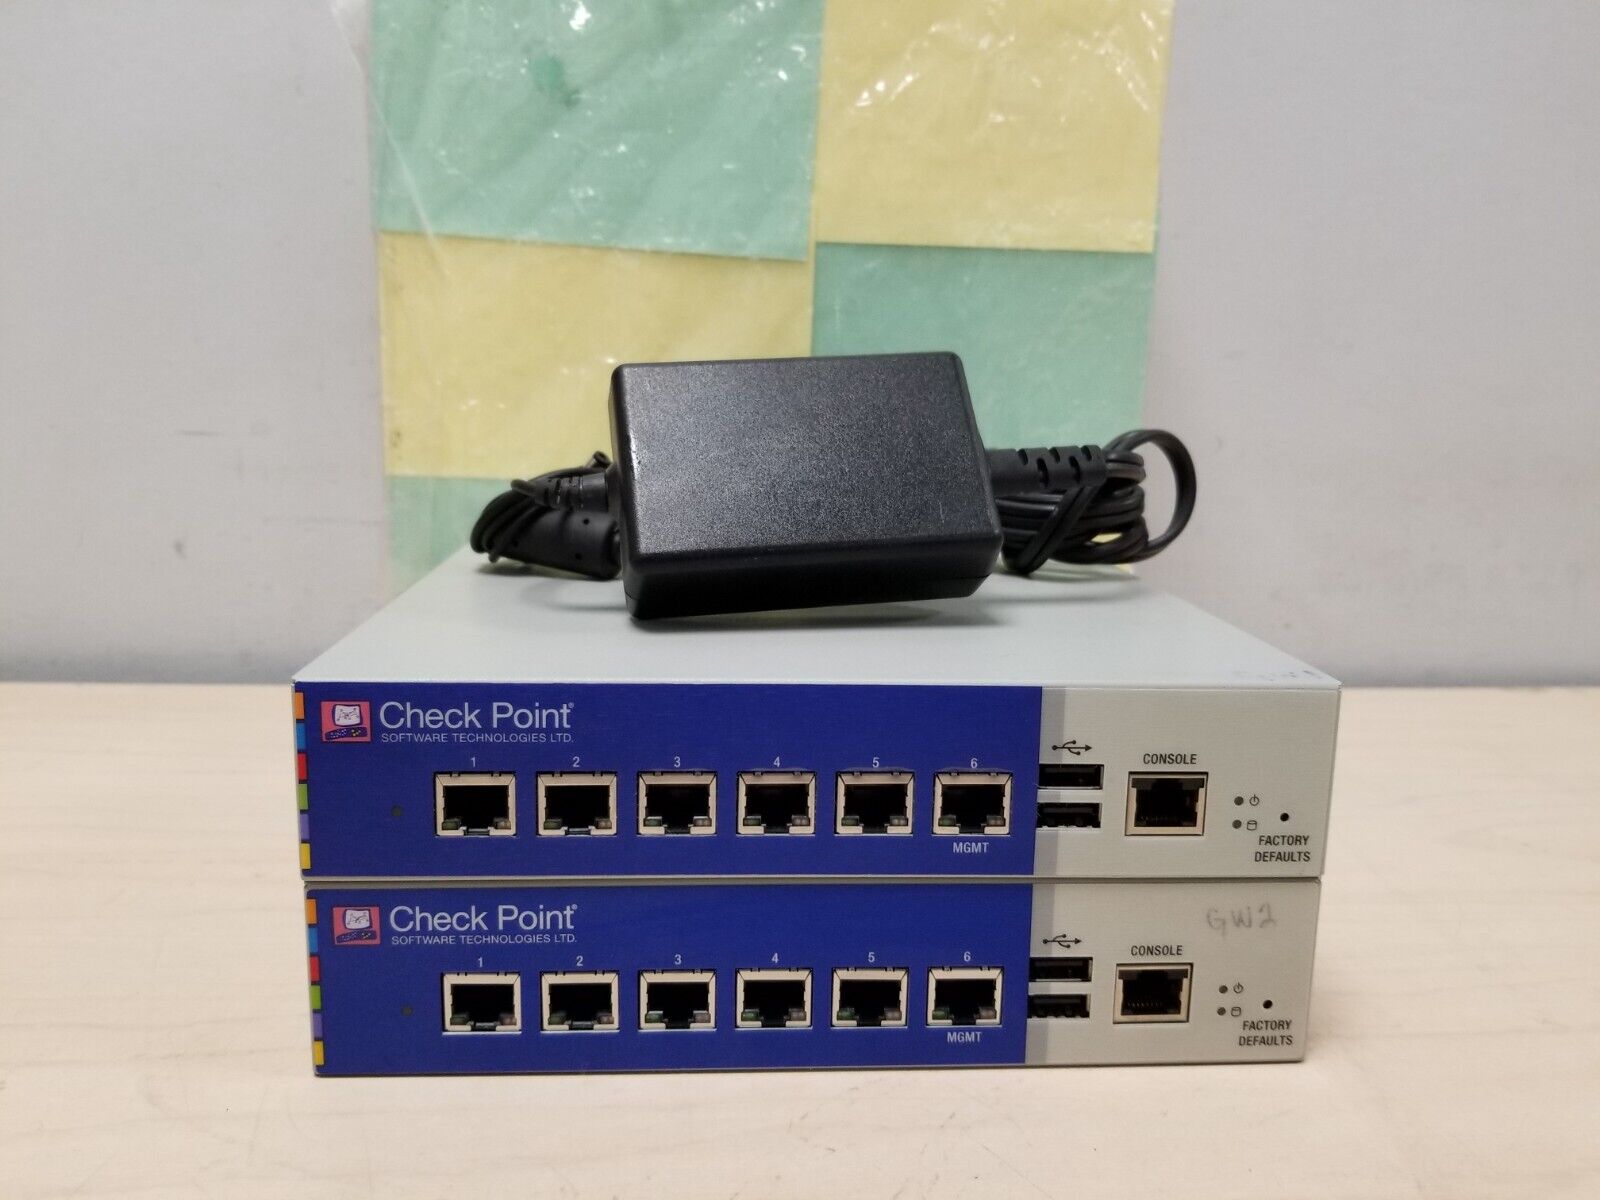 2 Check Point T-110 6-Port Gigabit Security Appliance Firewall W/1 Adapter #B290